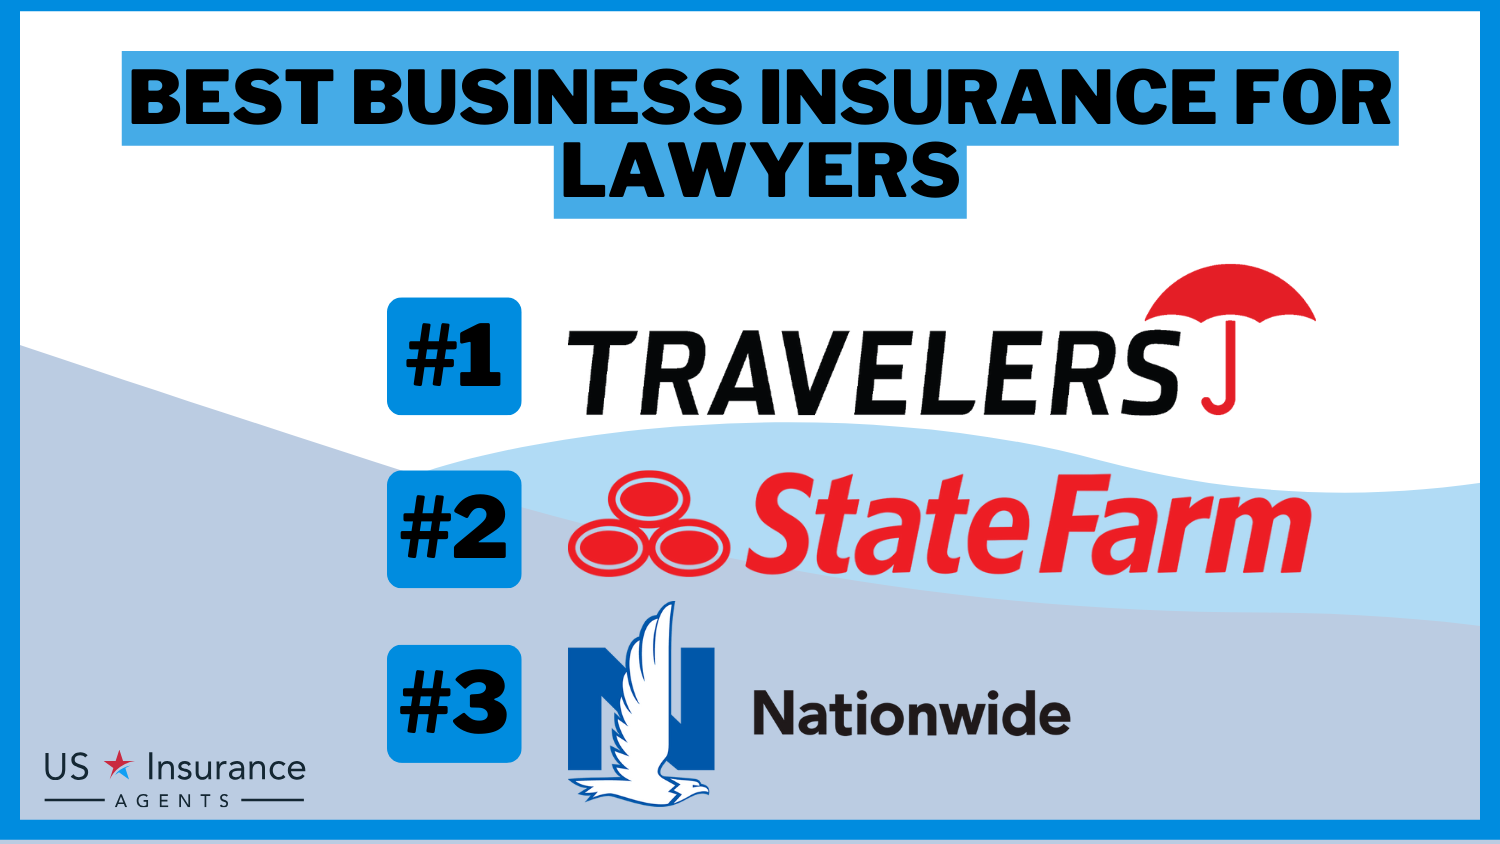 Best Business Insurance for Lawyers: Travelers, State Farm, and Nationwide.